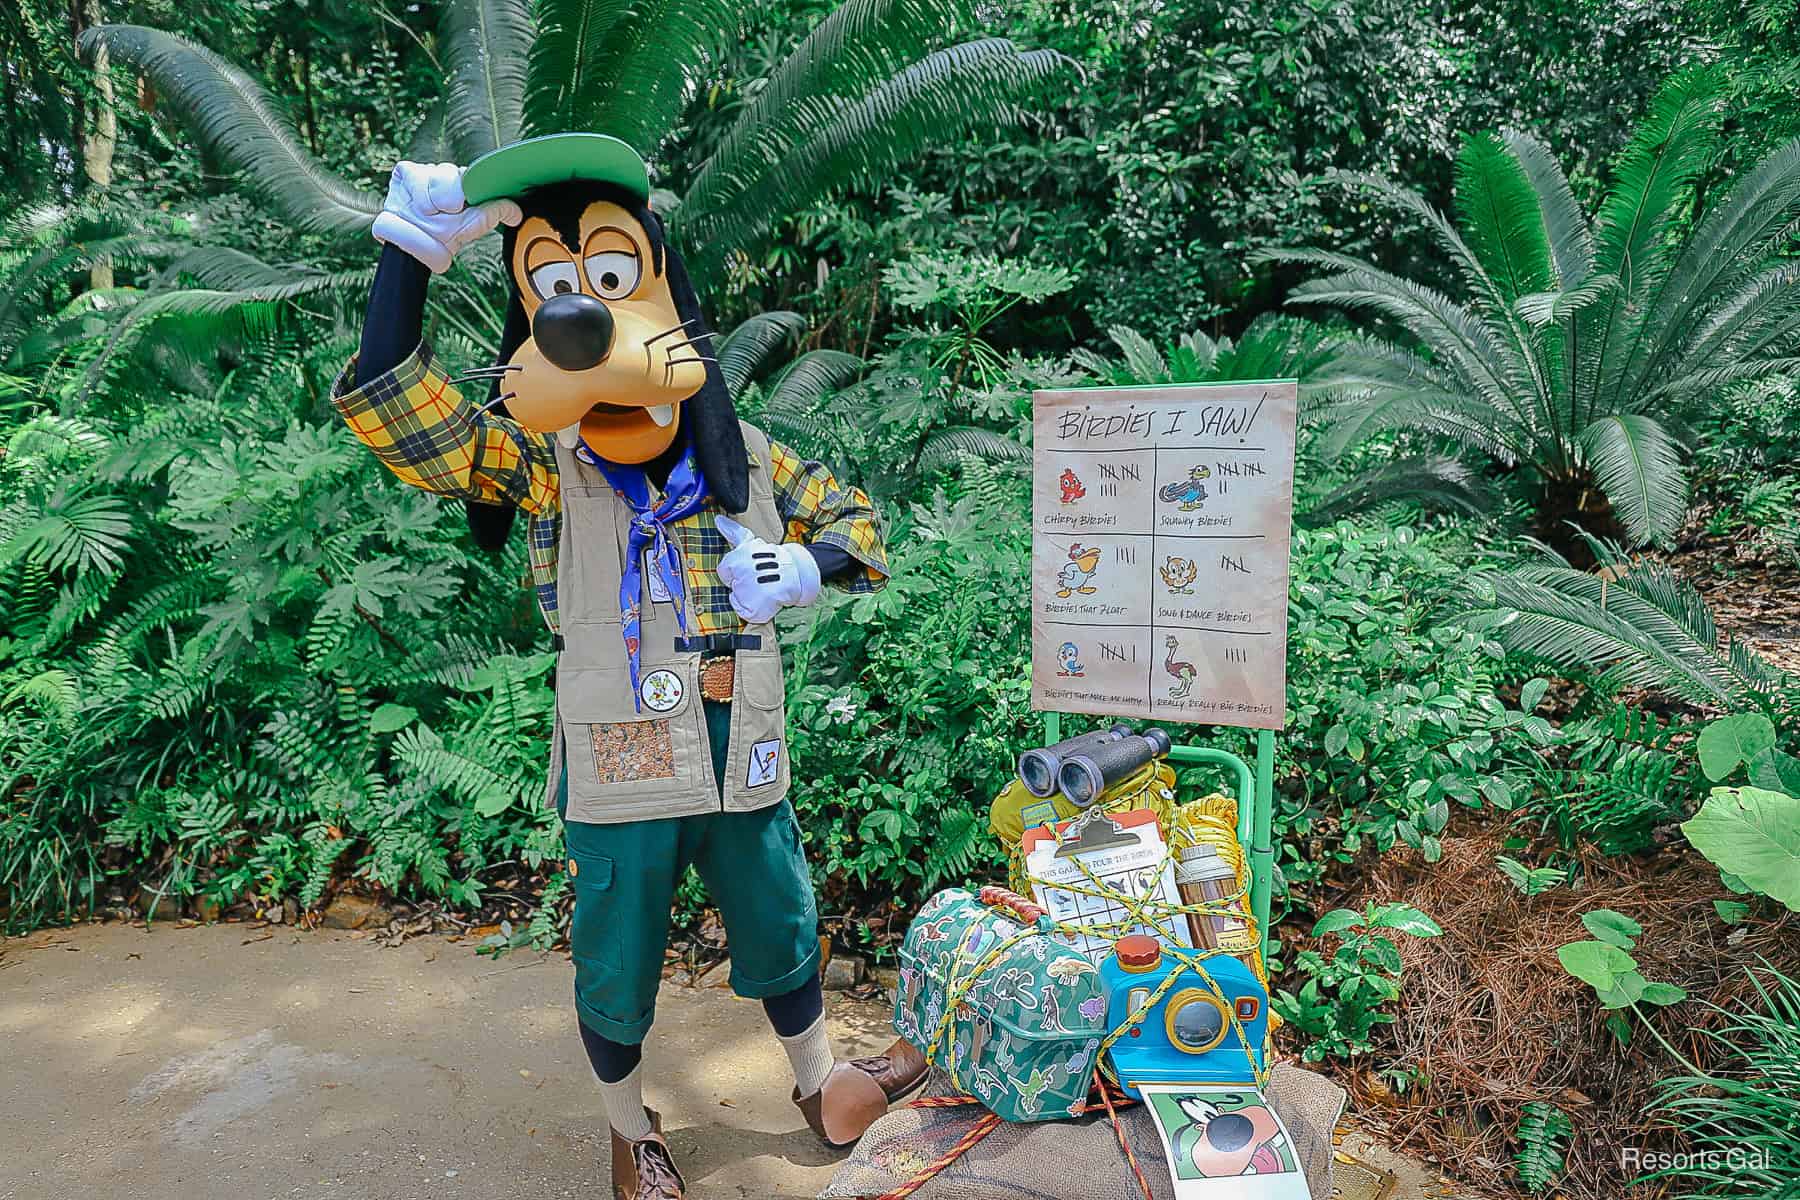 Goofy tips his hat for a photo. 